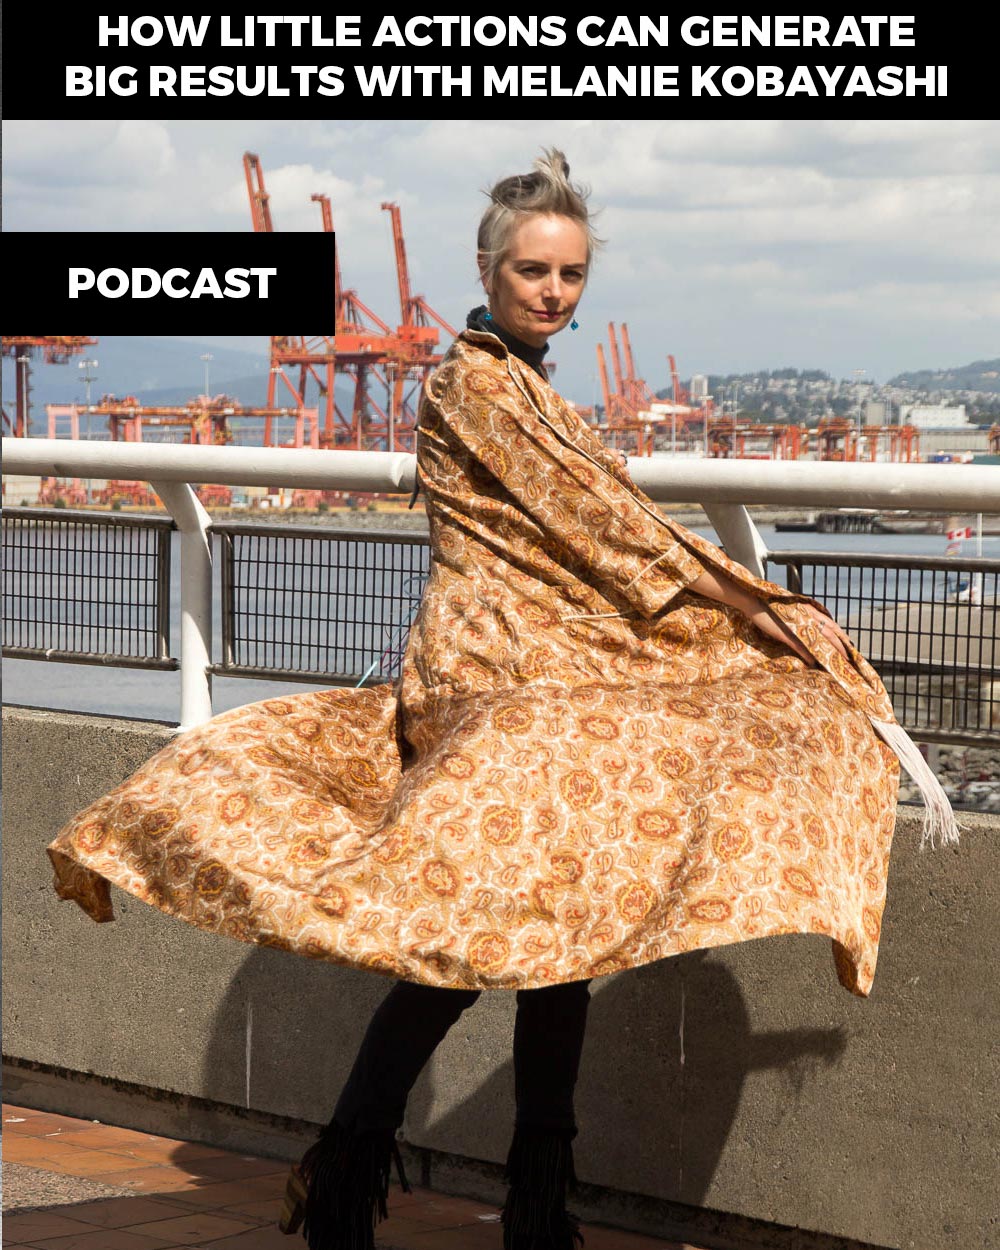 Melanie Kobayashi, style icon, comedian, artist - Listen to this inspirational woman in the True Potential Podcast